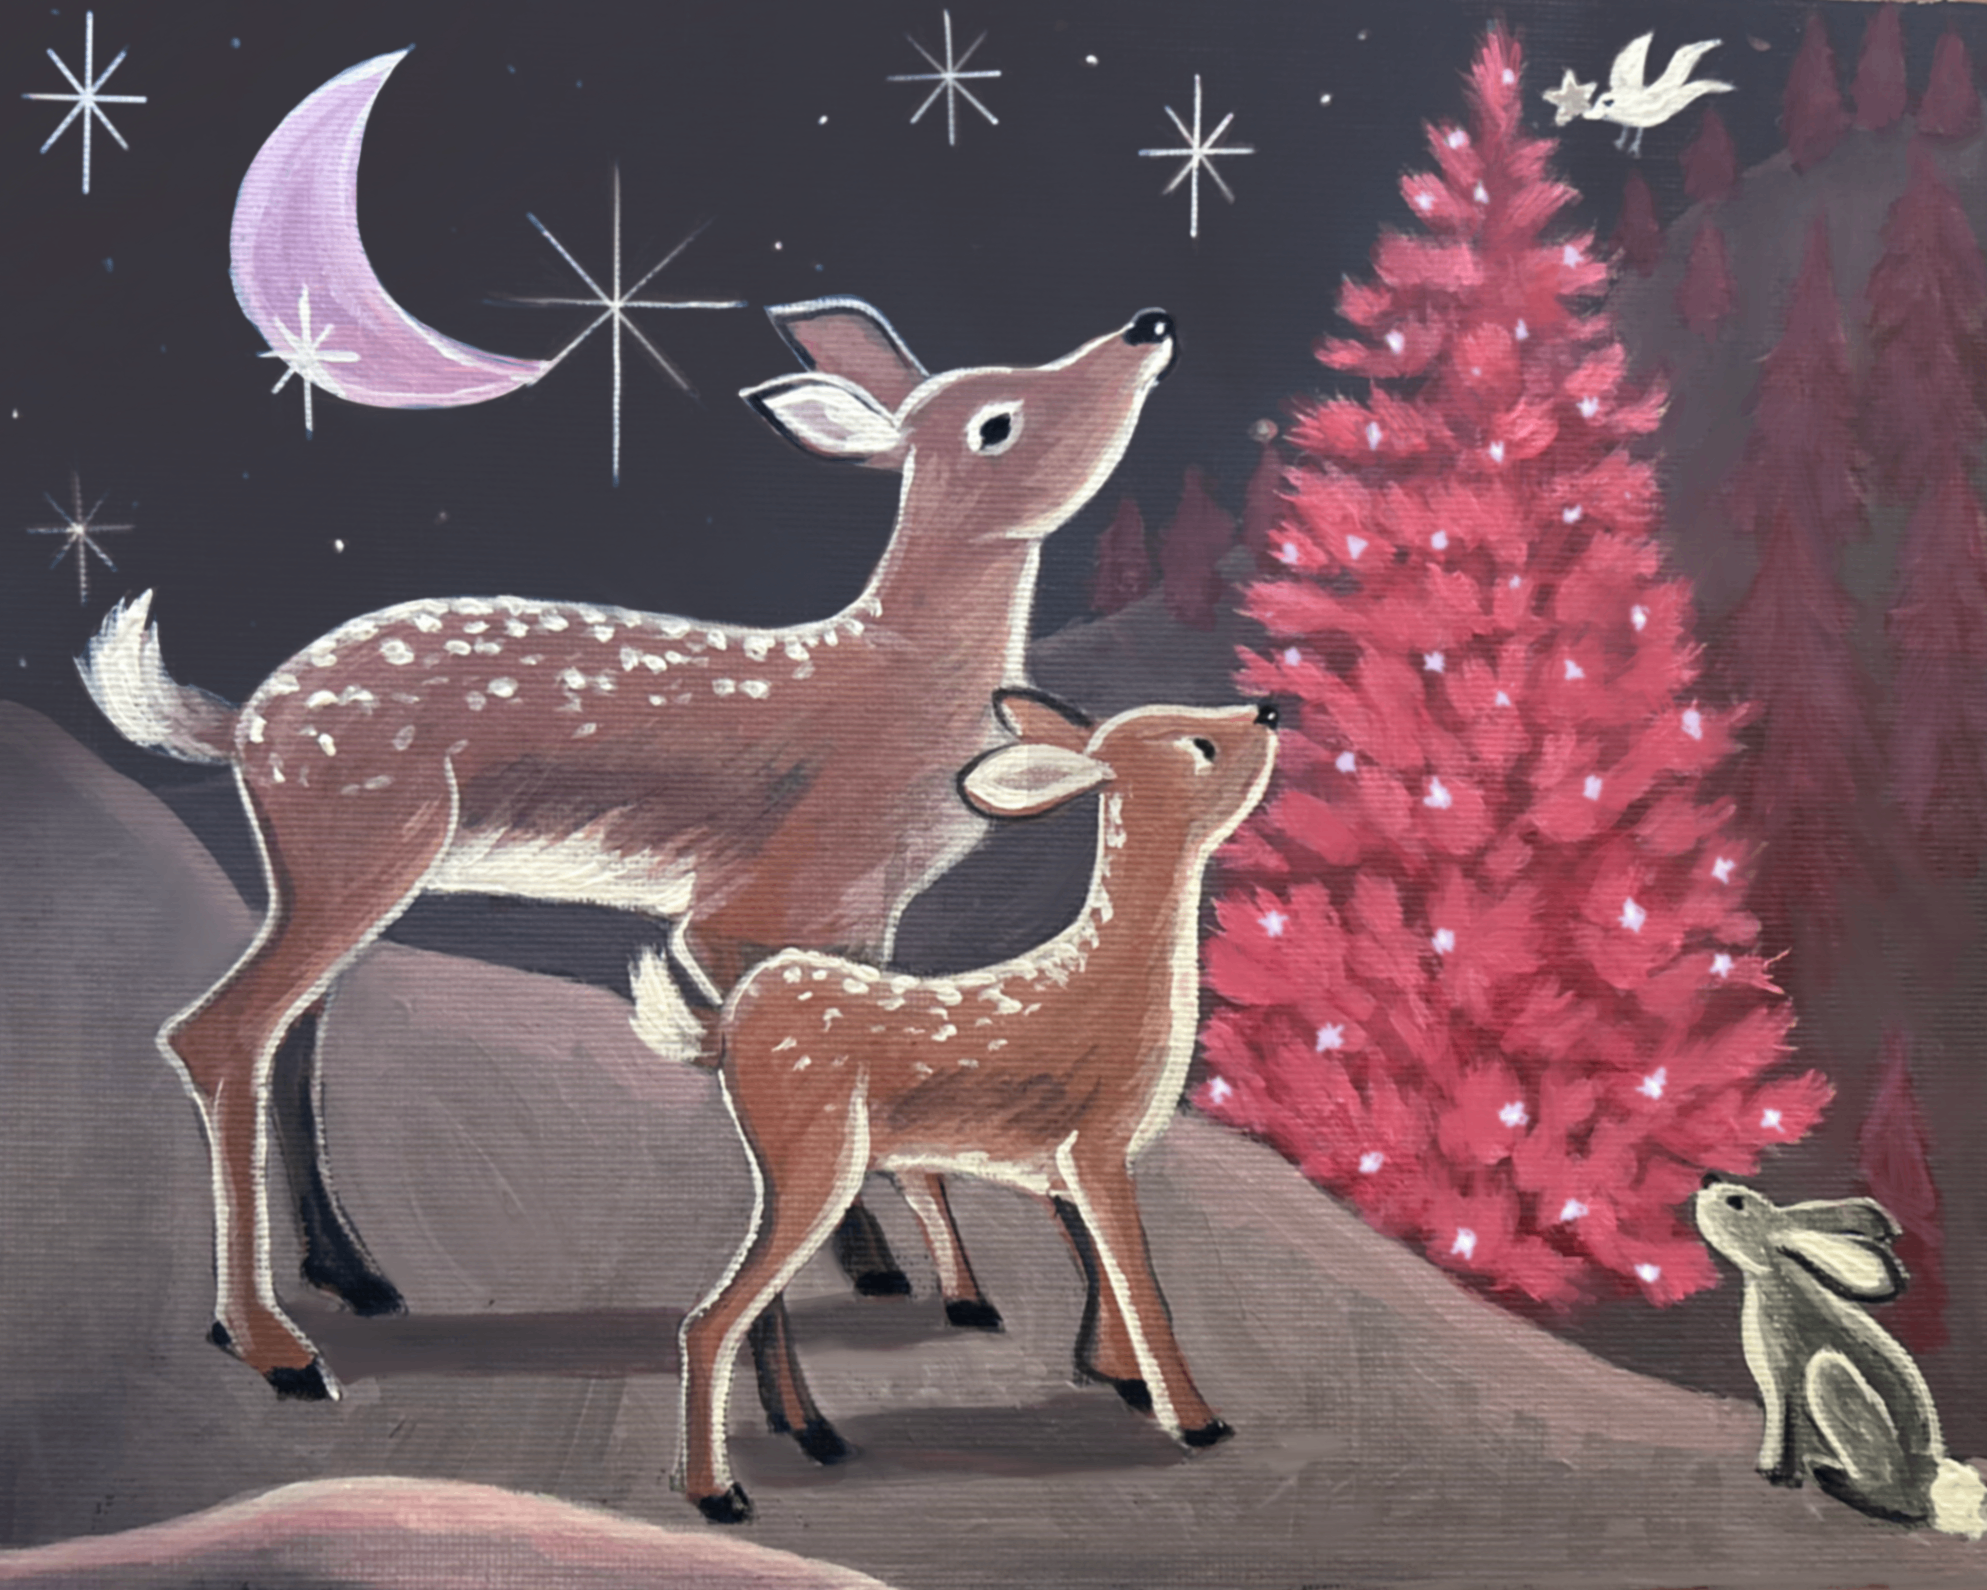 Silent Night painting on canvas featuring 2 deer and a rabbit alongside a red Christmas tree and night sky